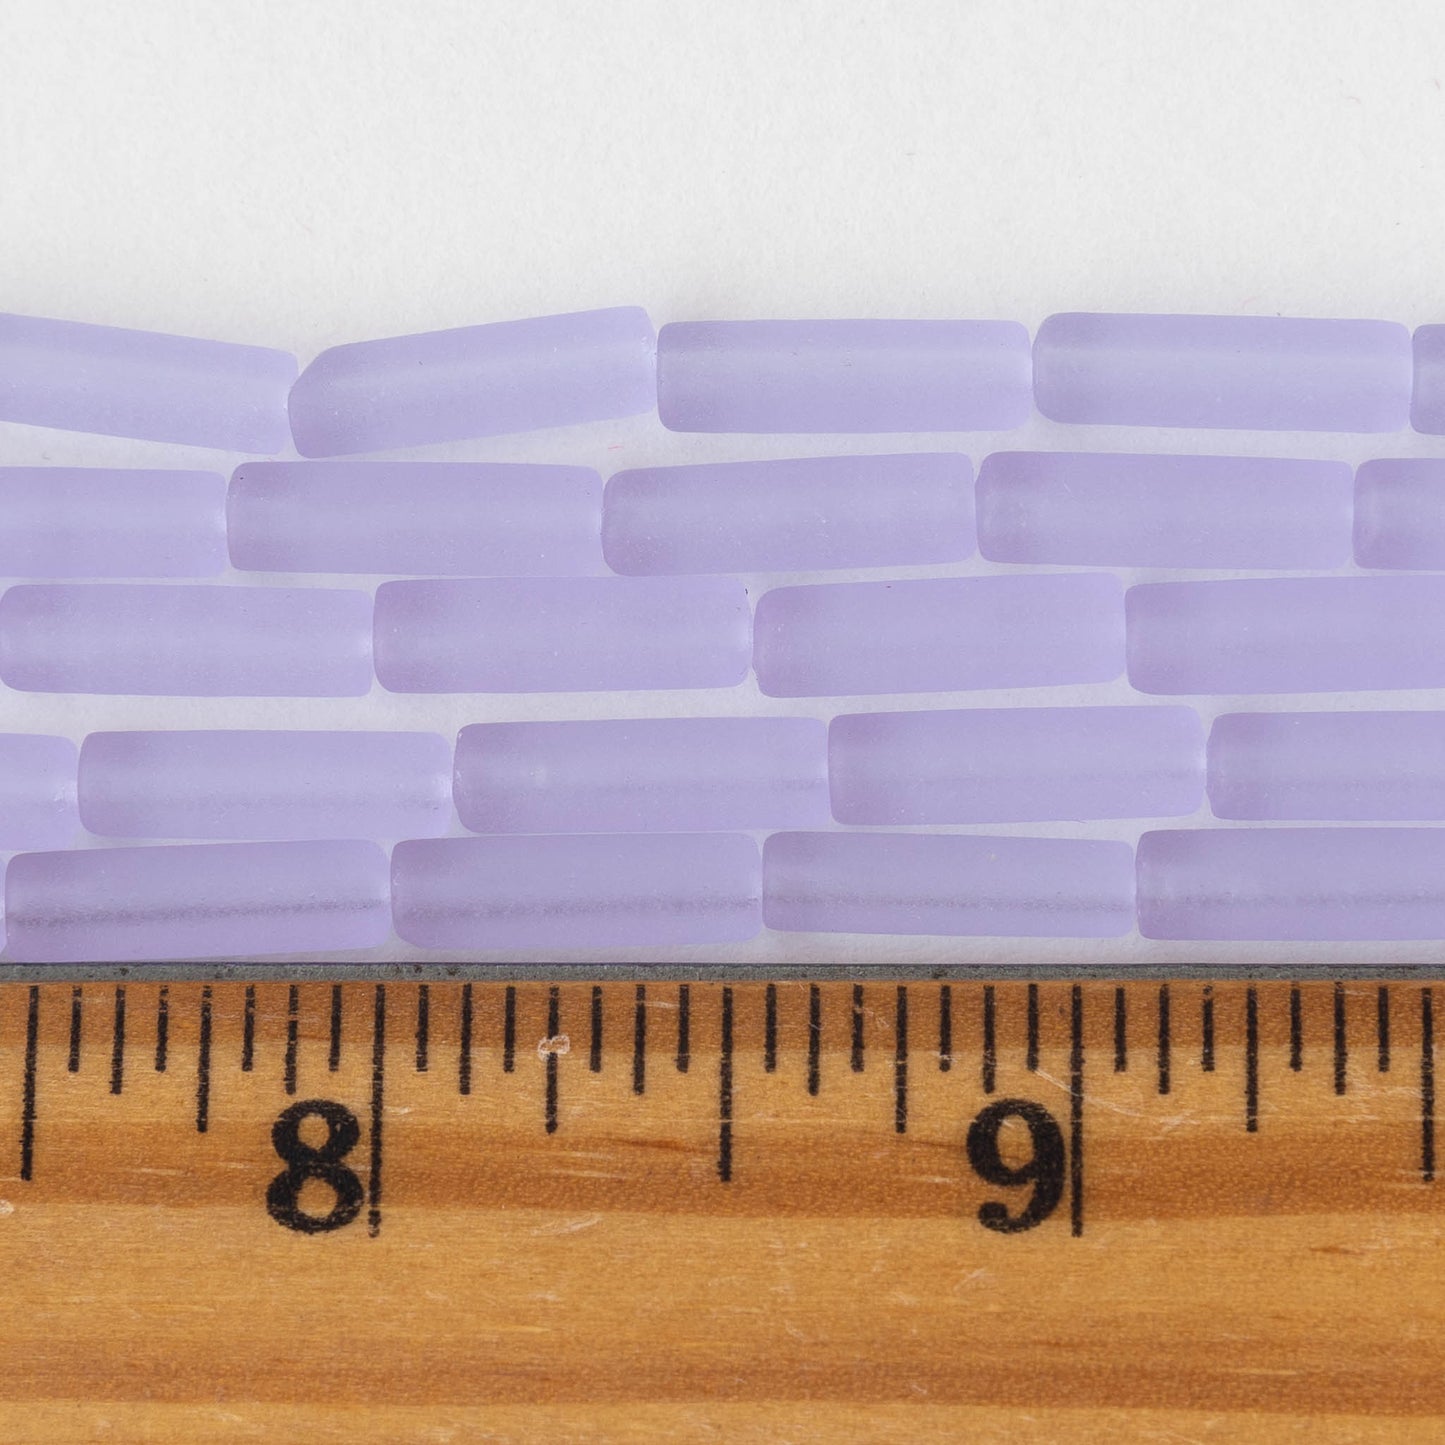 4x14mm Frosted Glass Tube Beads - Transparent Lavender